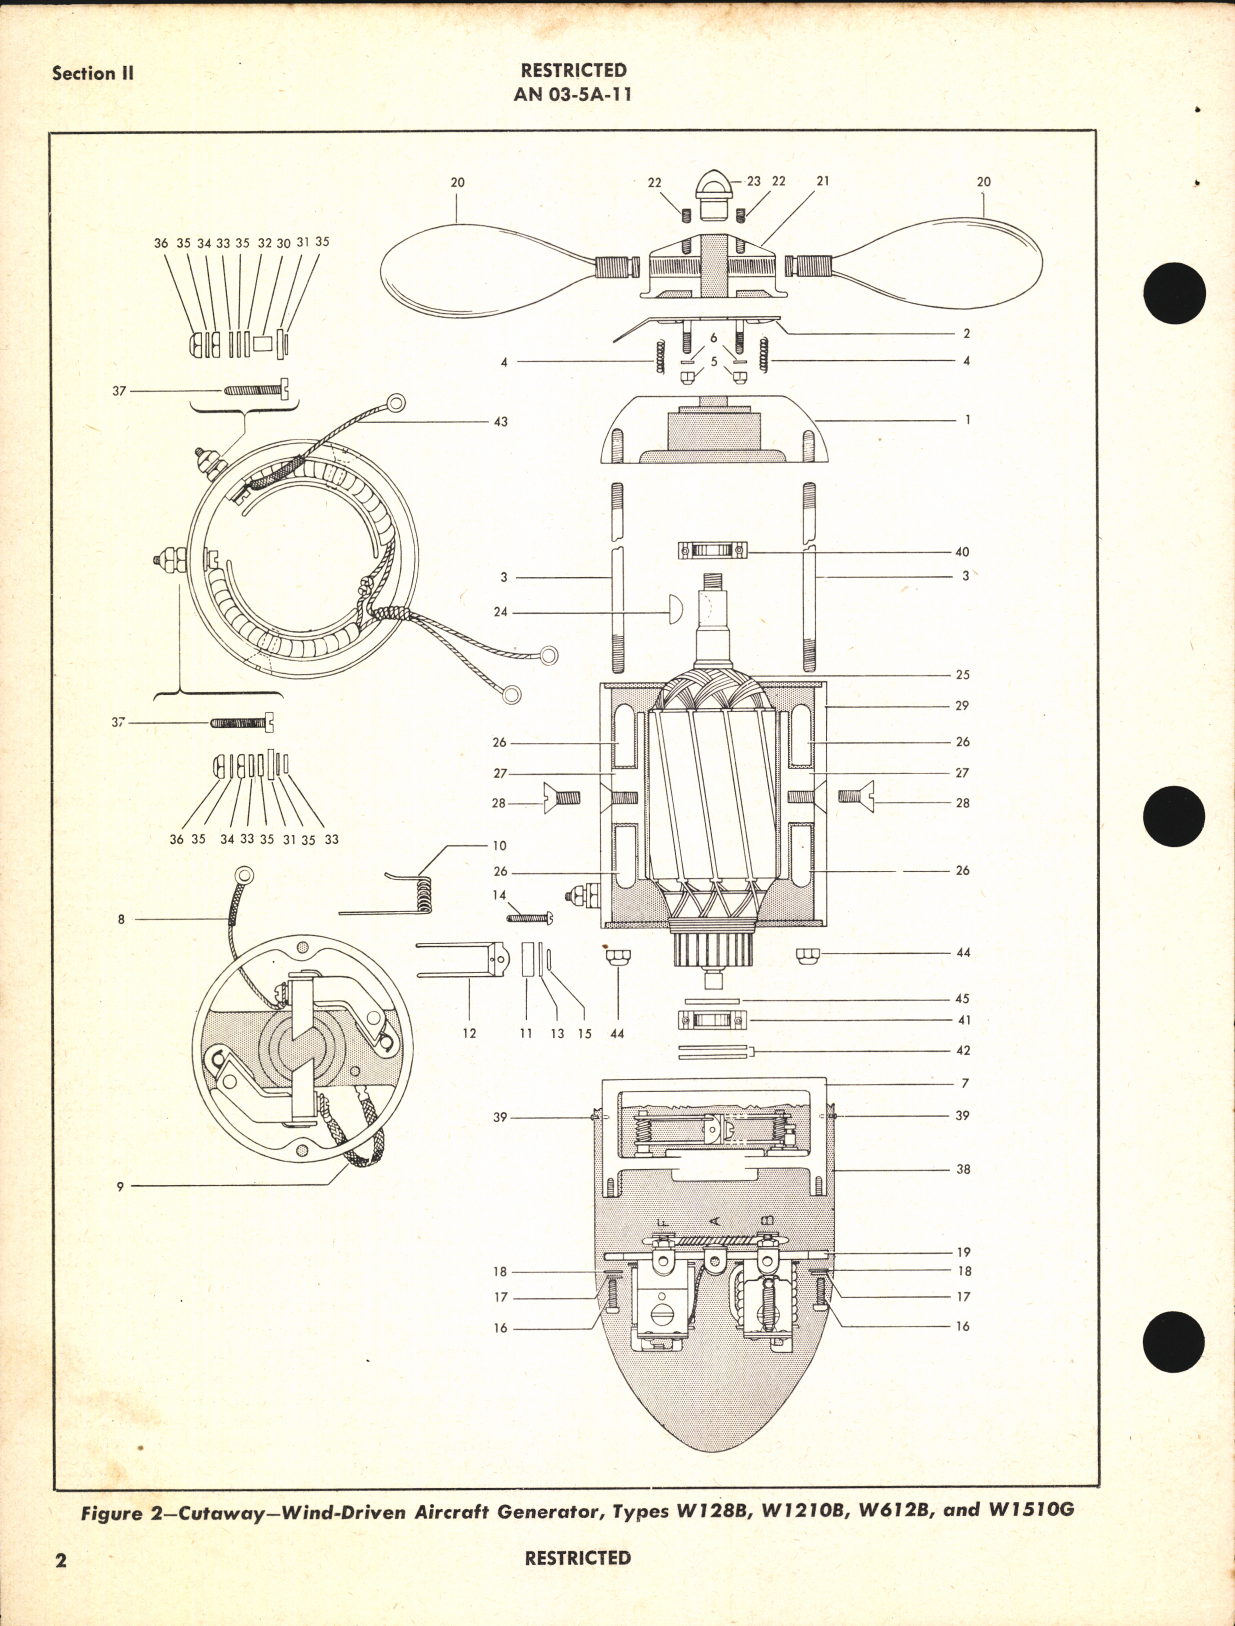 Sample page 6 from AirCorps Library document: Handbook of Instructions with Parts Catalog for Wind Driven Aircraft Generators